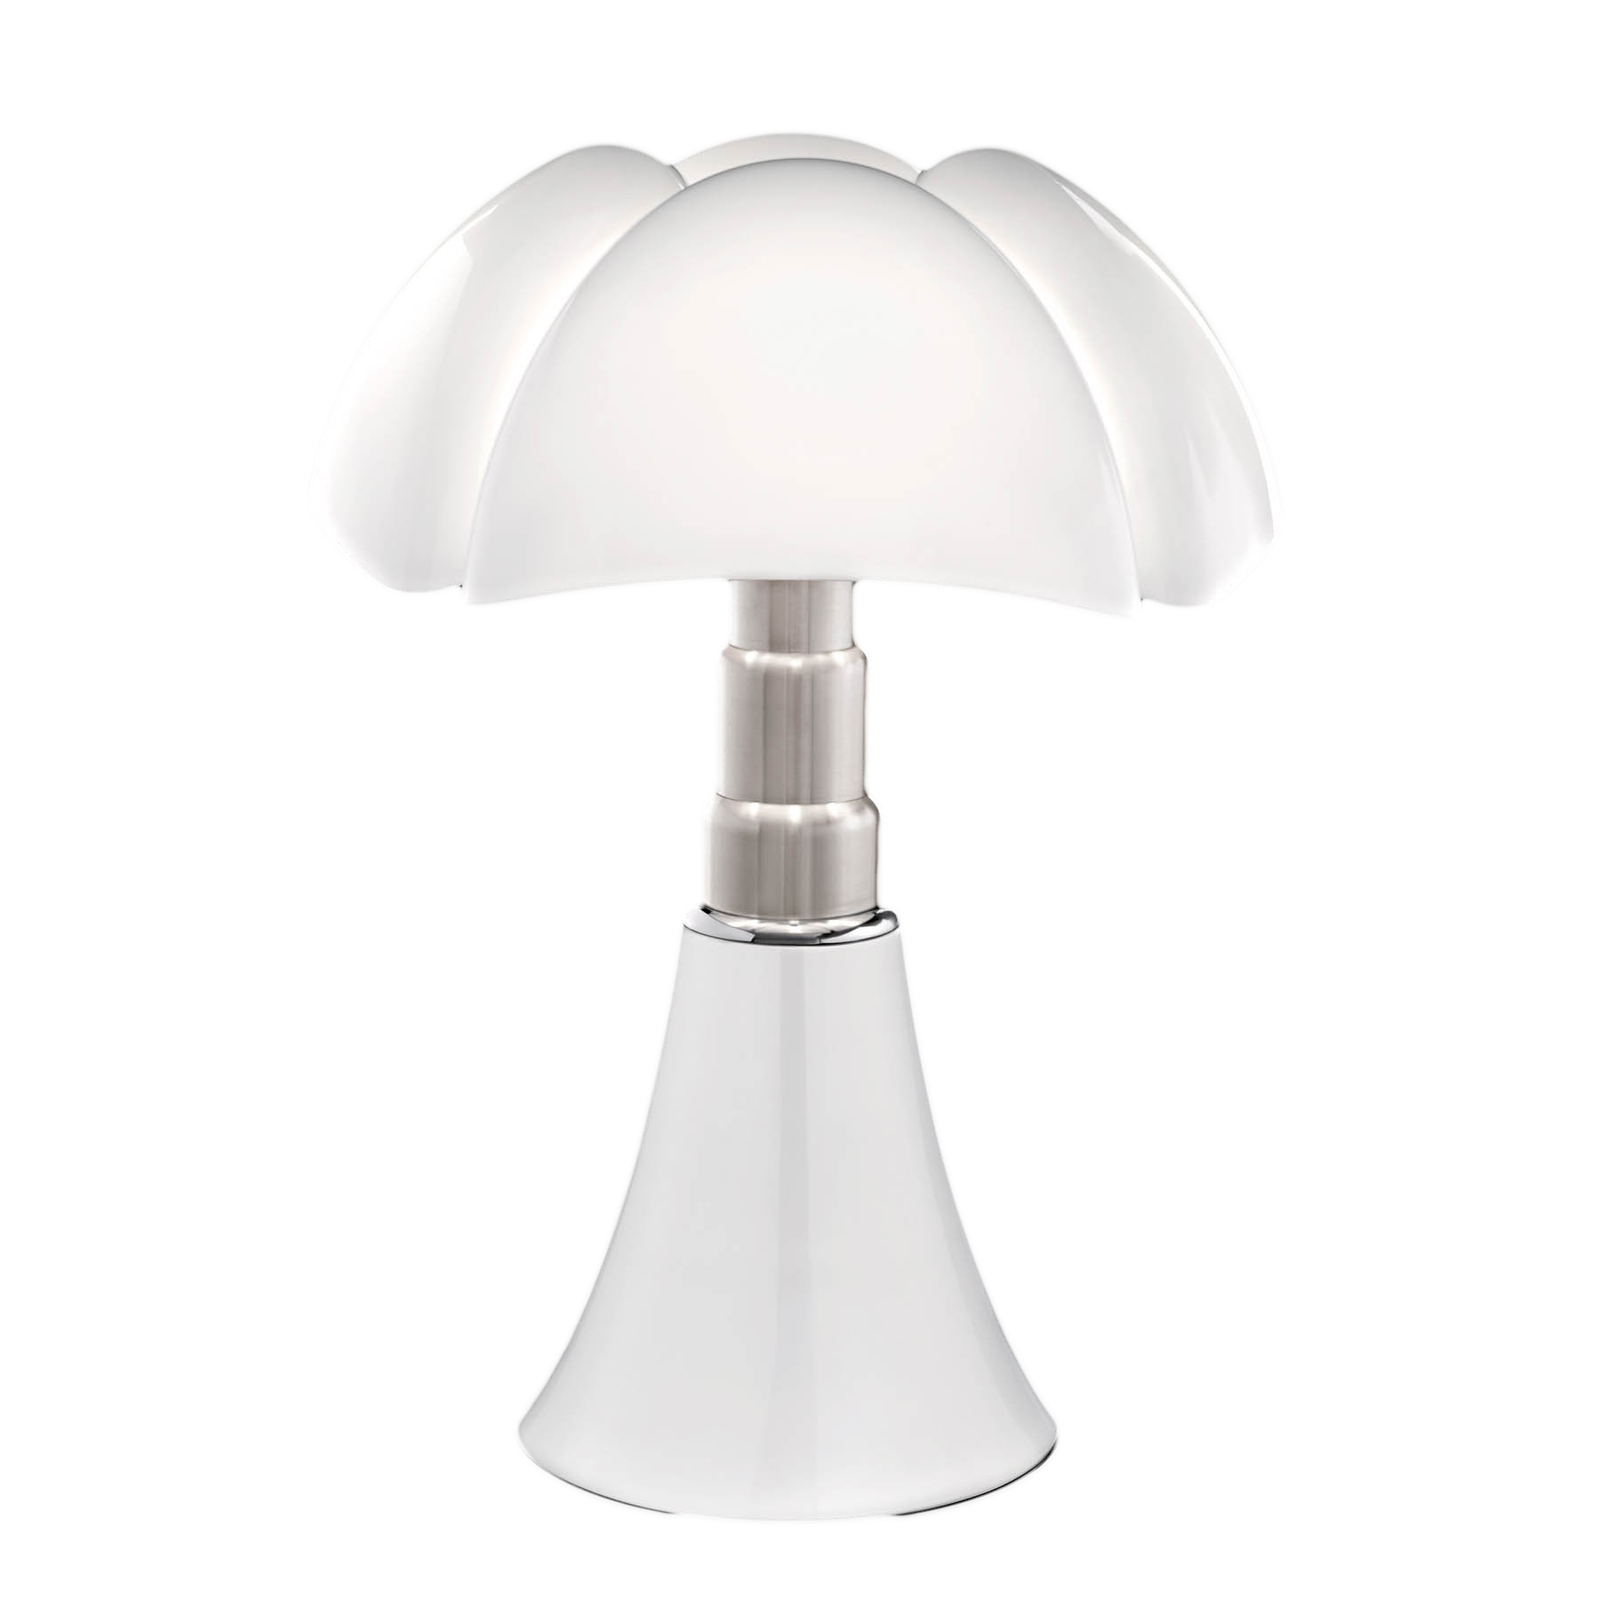 Martinelli Luce Pipistrello LED, dimmable, blanc